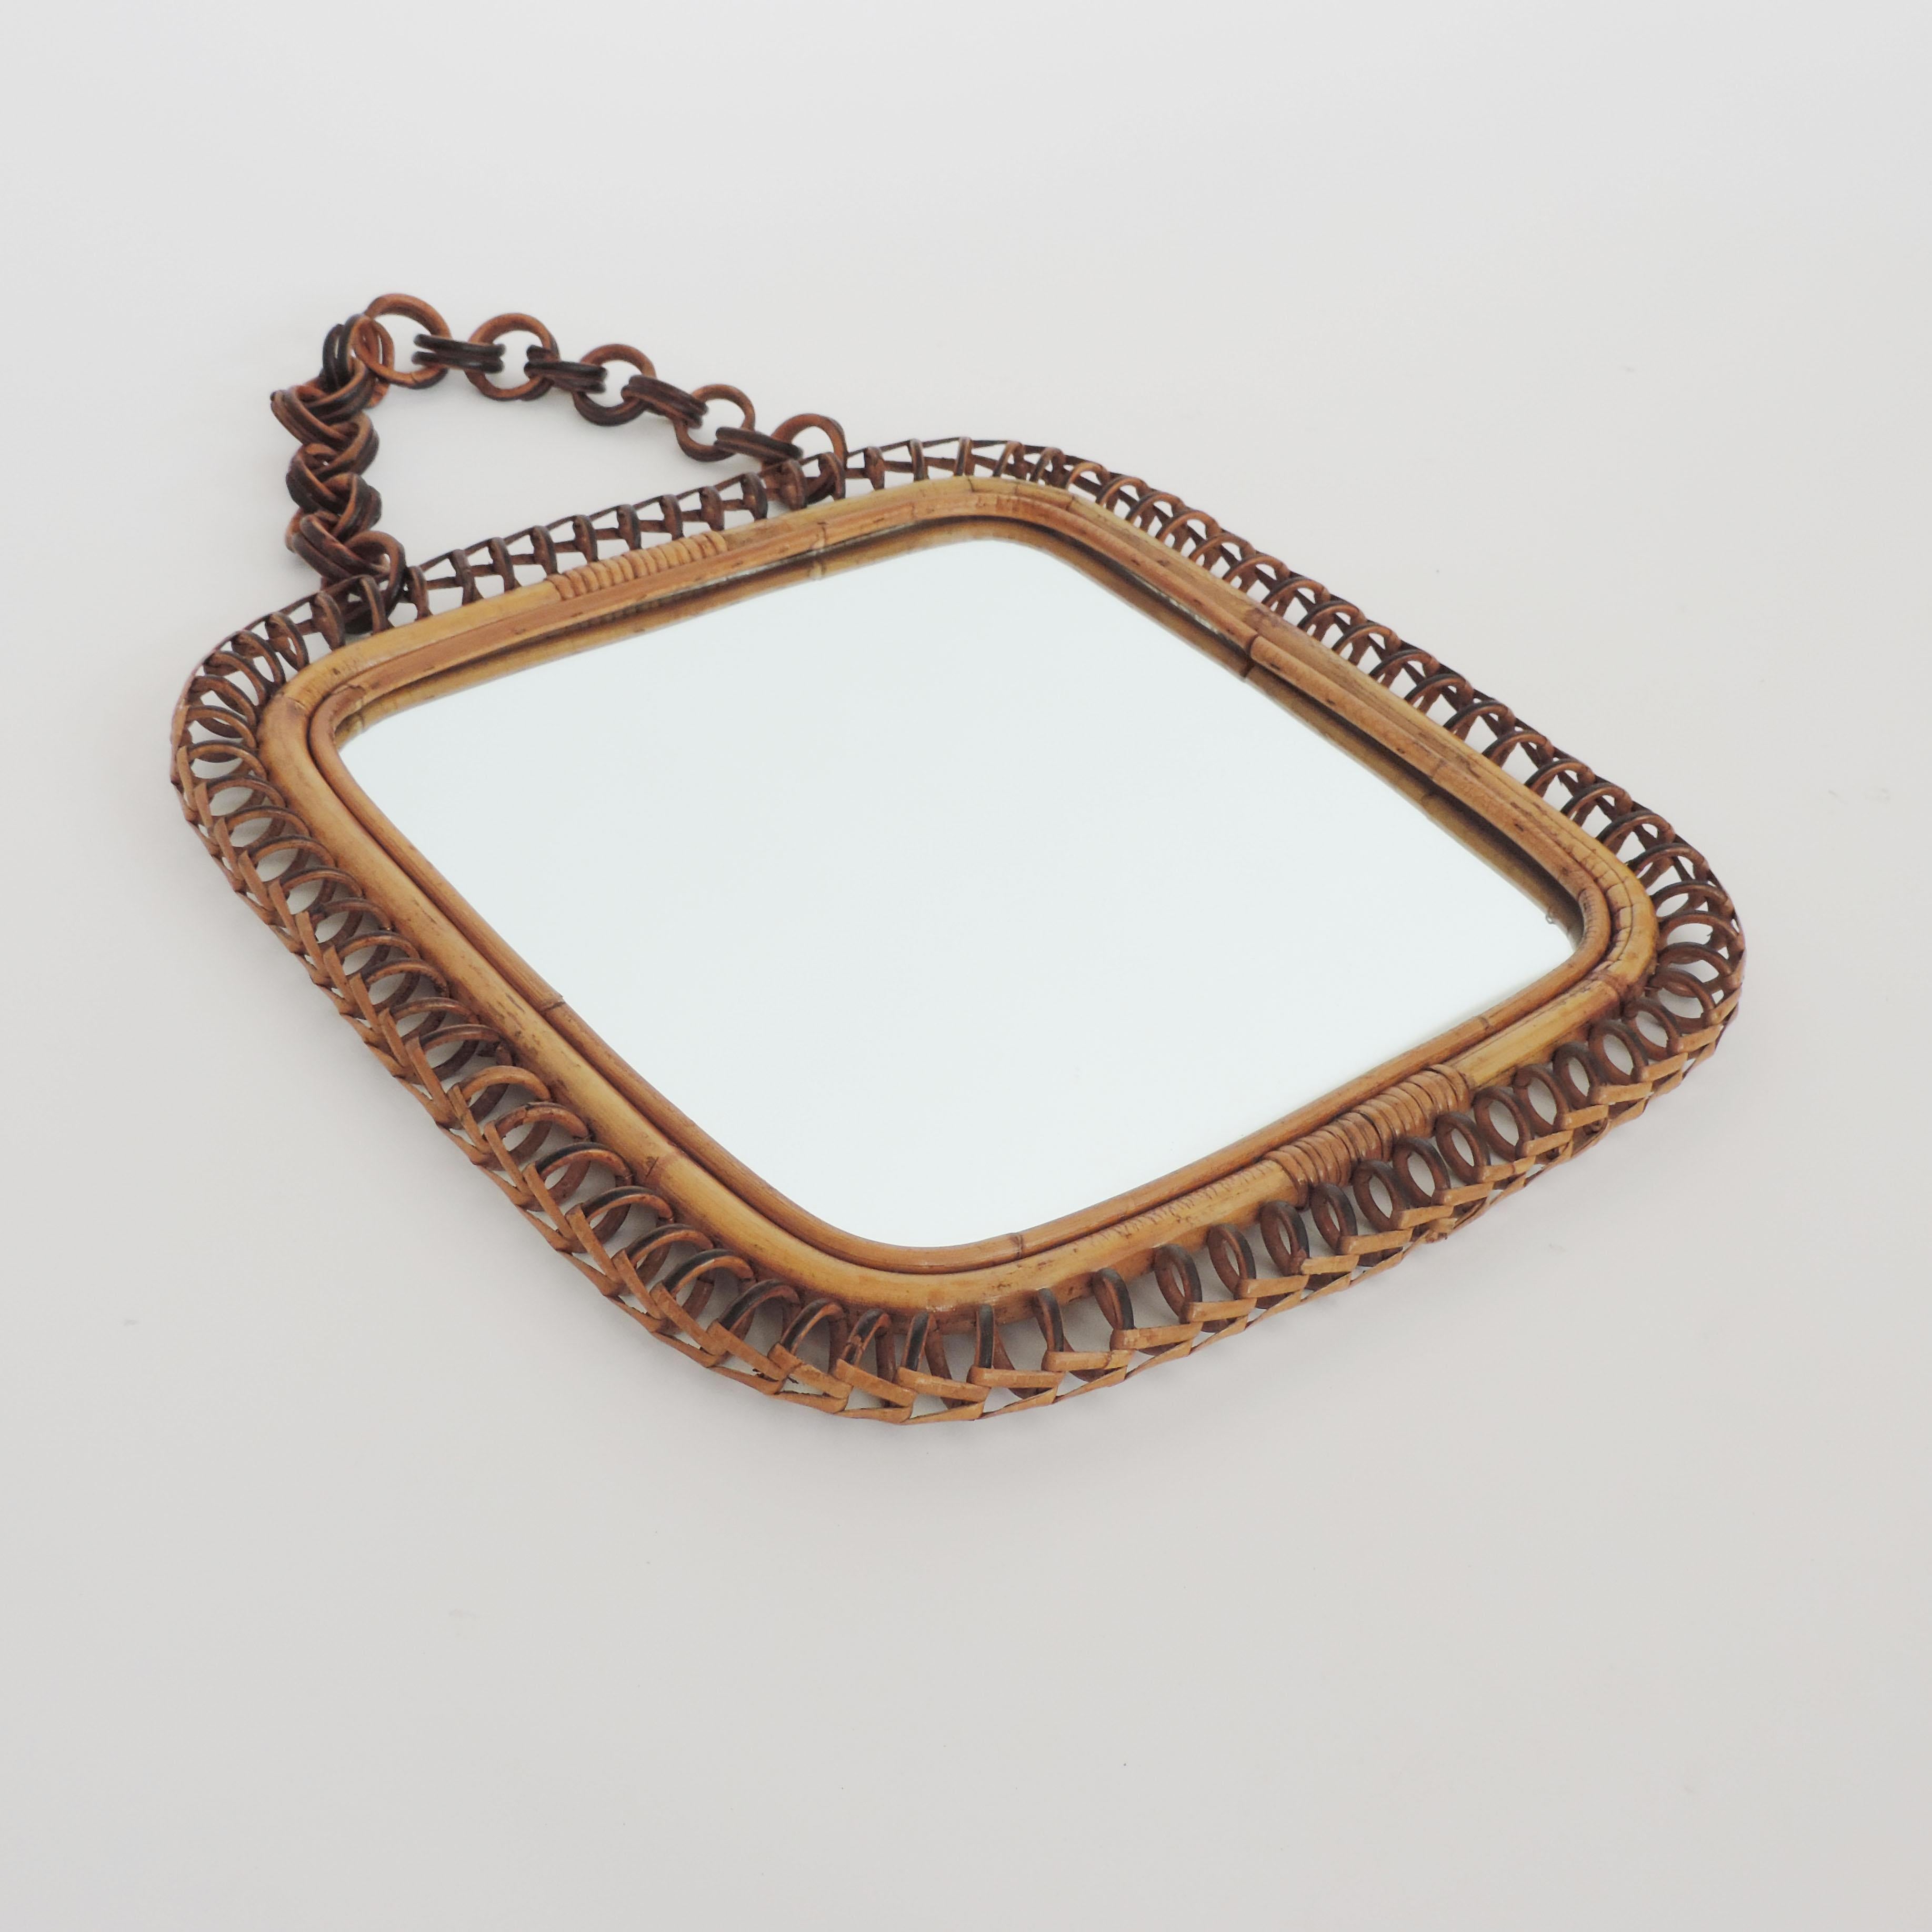 Splendid squareand undulating wicker and Bamboo wall mirror, Italy, 1950s.
With its original bamboo chain.